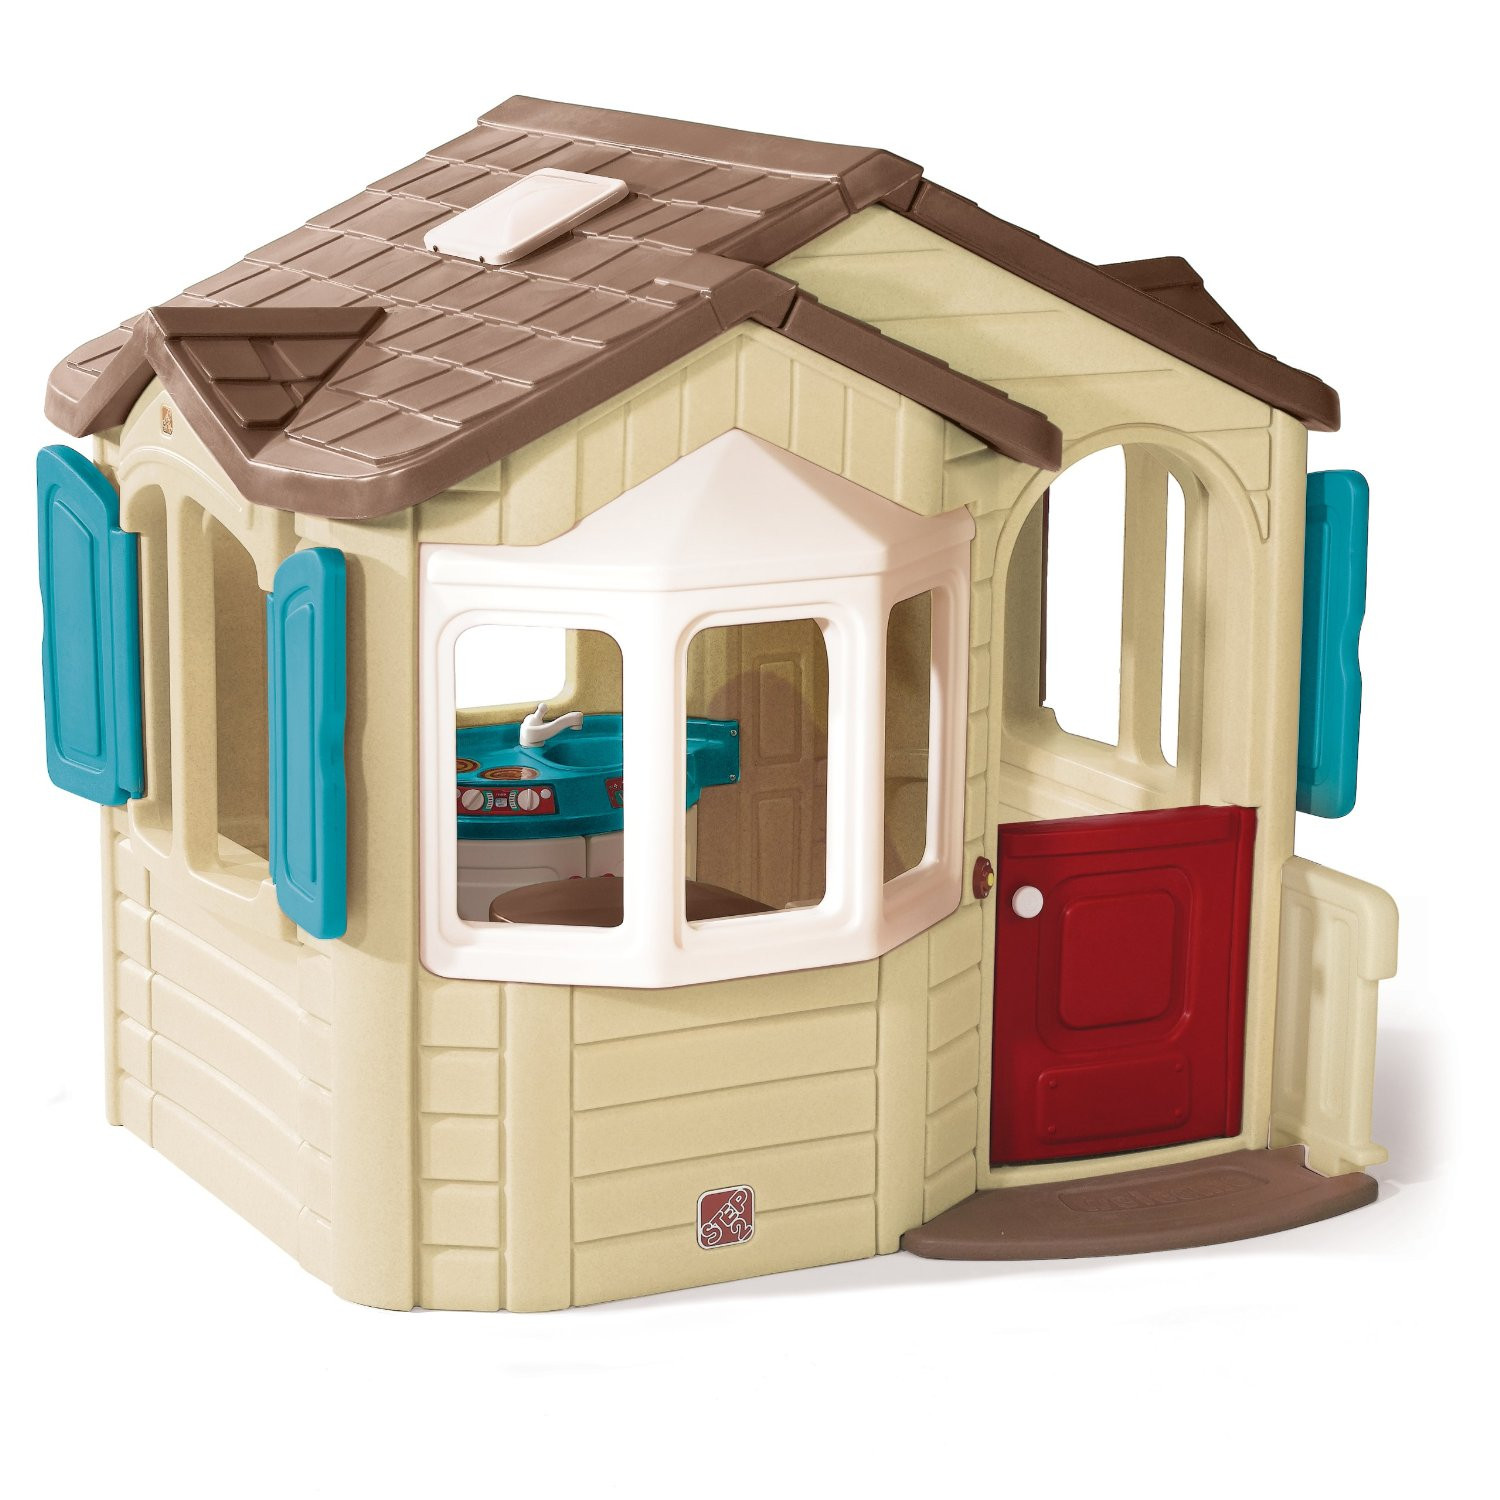 Kids Outdoor Plastic Playhouses
 Outdoor Playhouse with Kitchen Inside